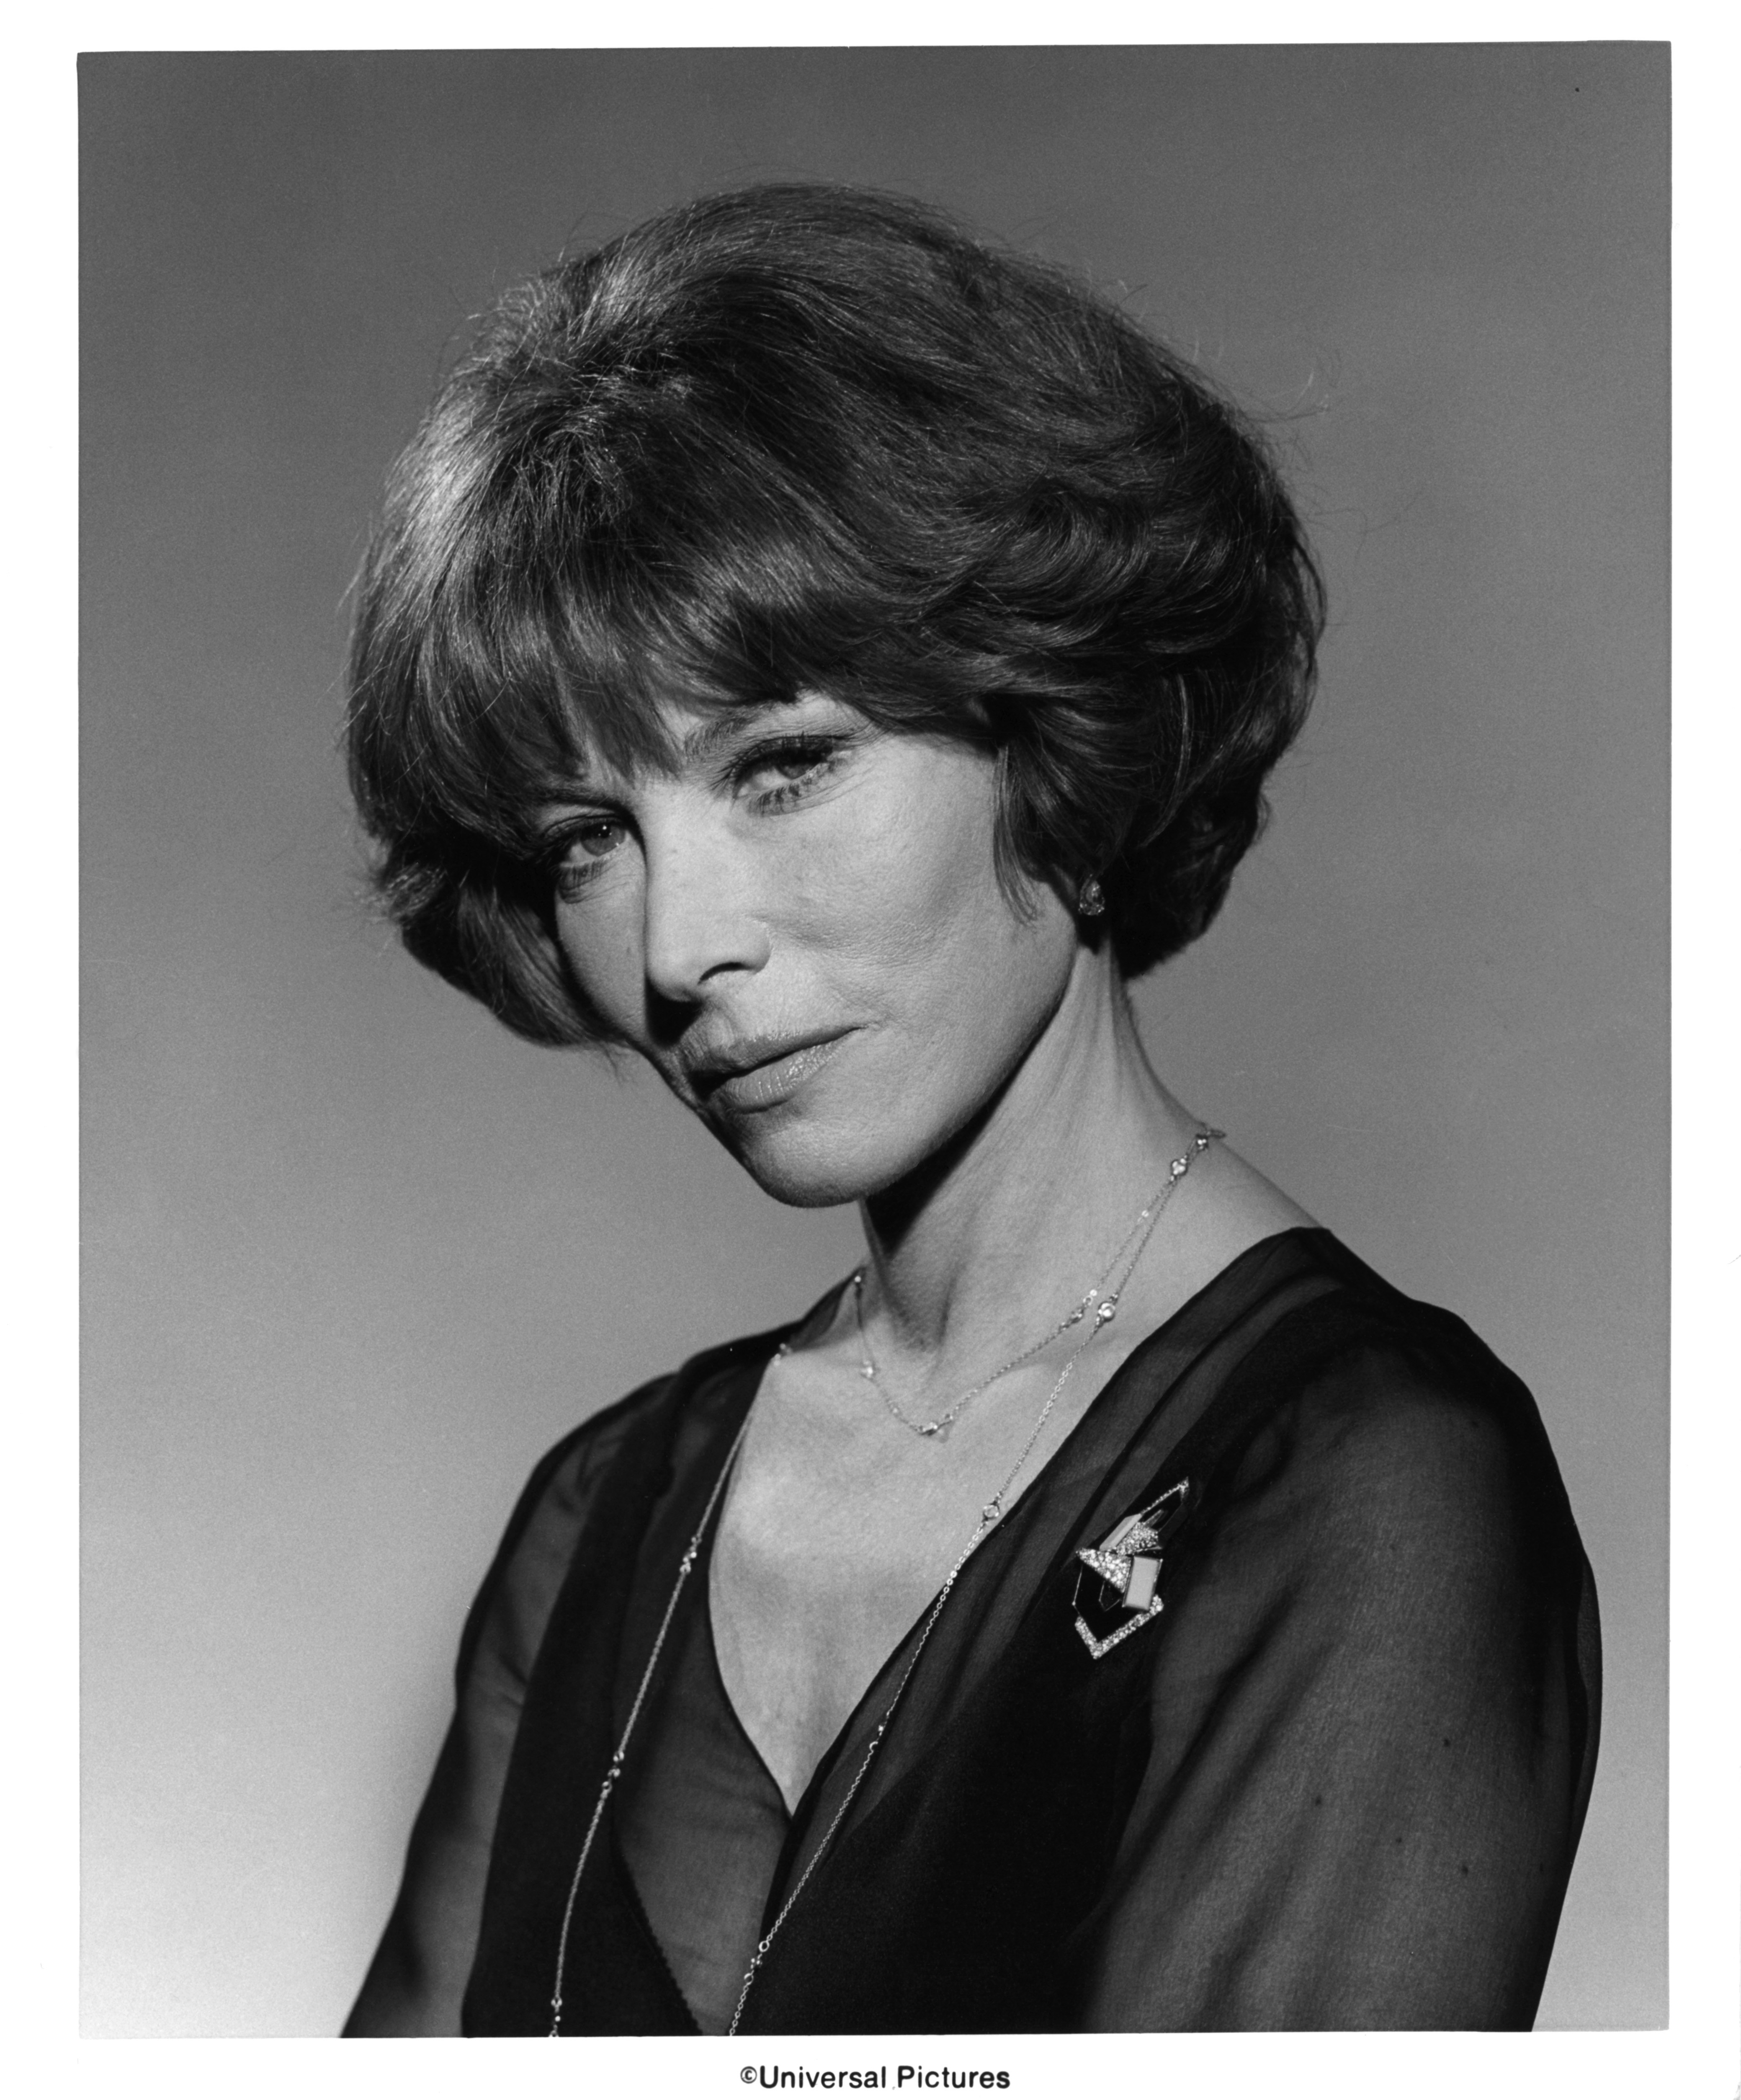 Lee Grant in "Airport '77," 1977 | Source: Getty Images